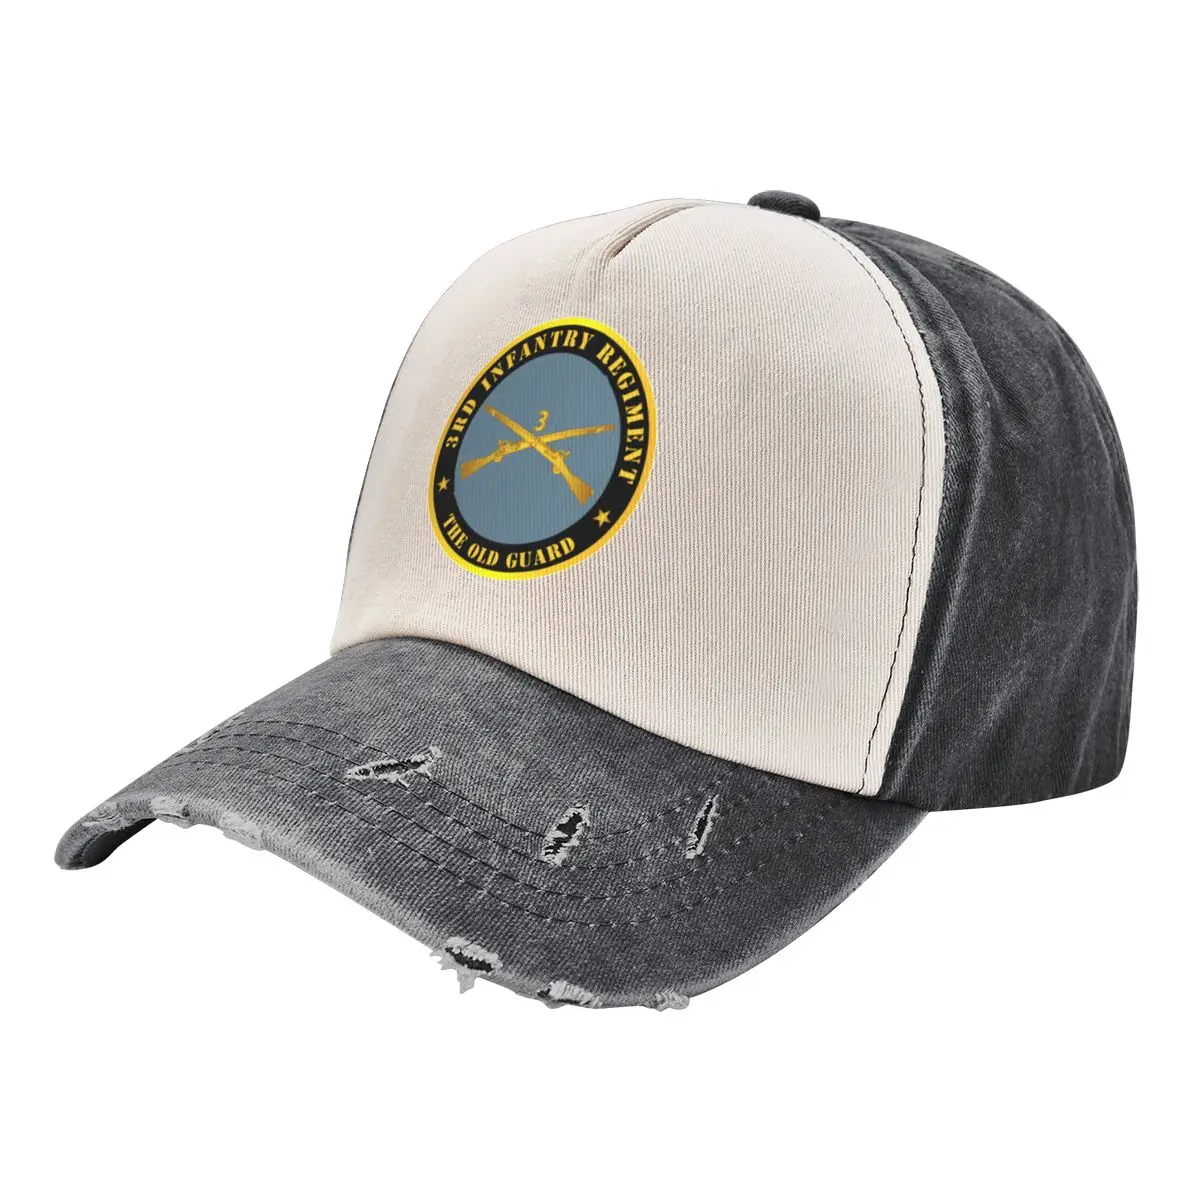 

Army - 3rd Infantry Regiment -The Old Guard w Inf Branch Baseball Cap Golf Hat Fashion Beach western Hat Golf Men's Caps Women's